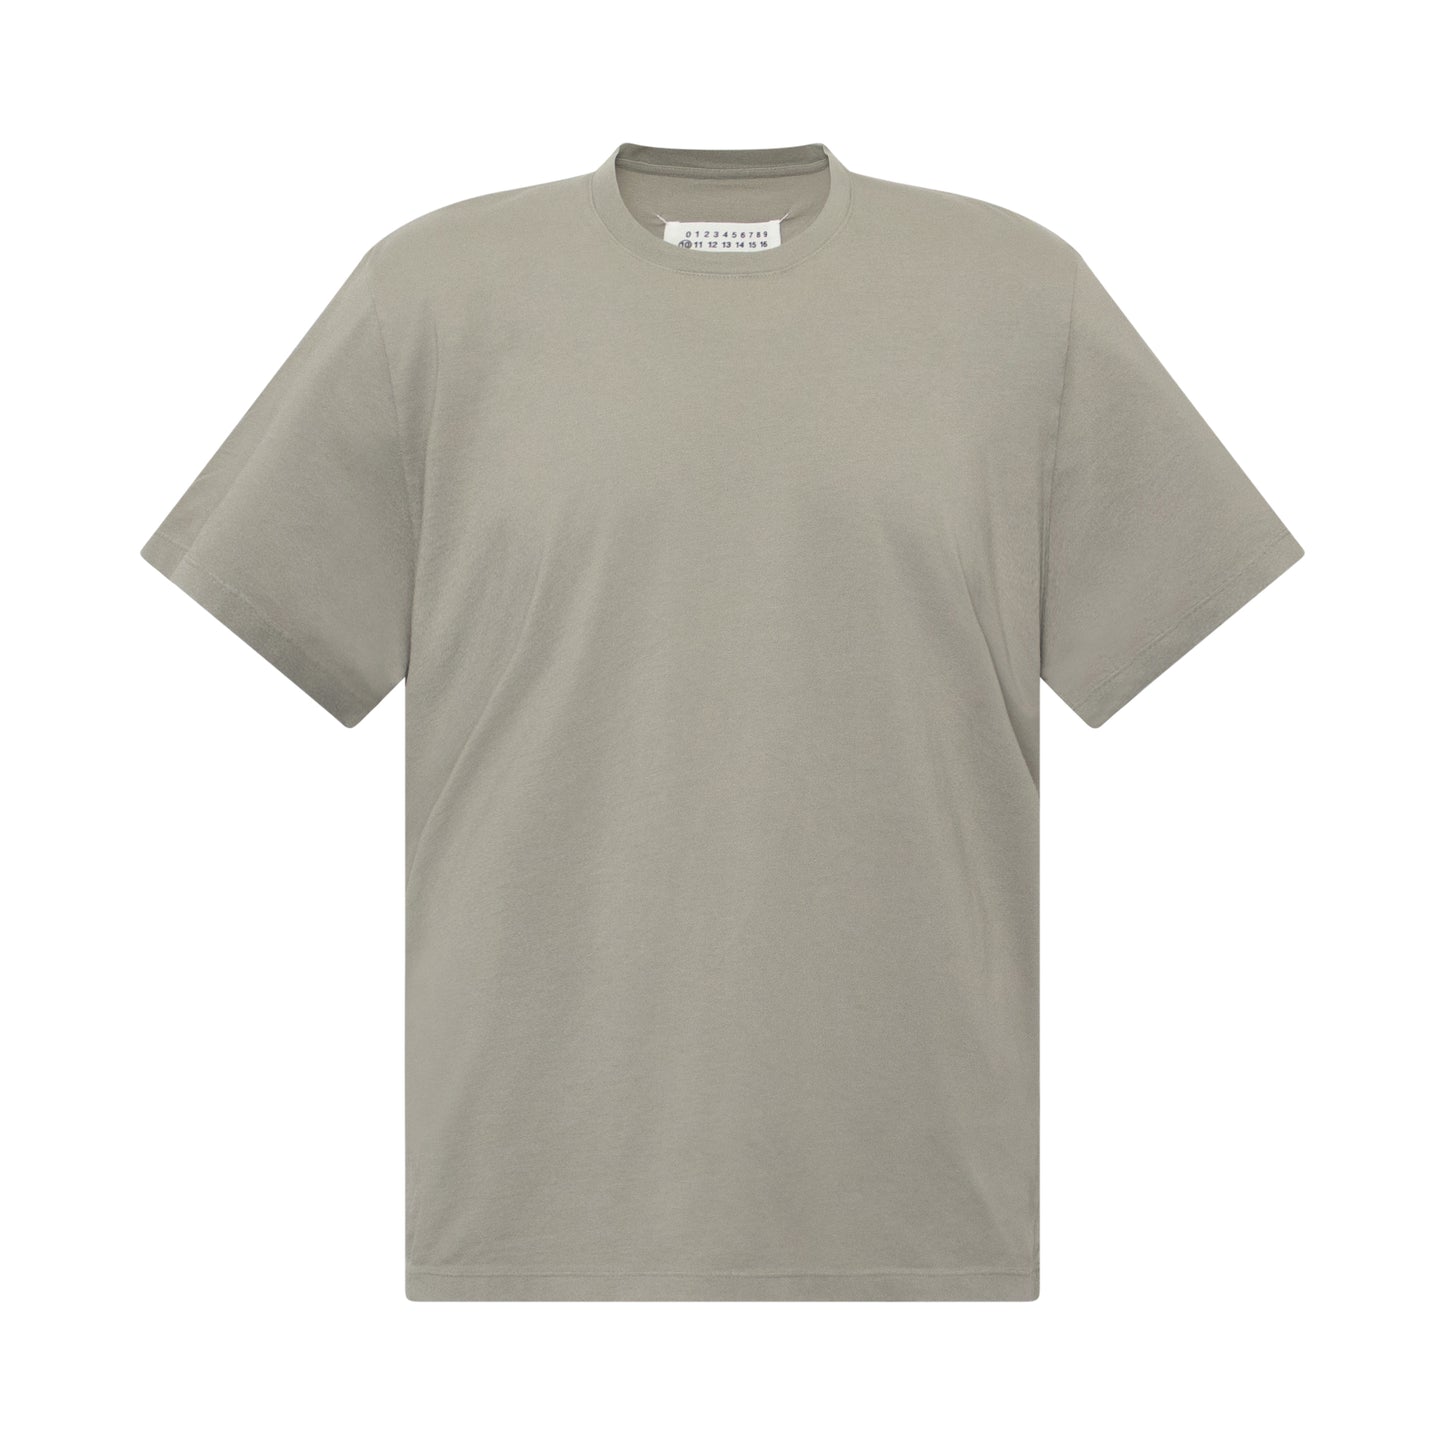 Classic Basic T-Shirt in Sage